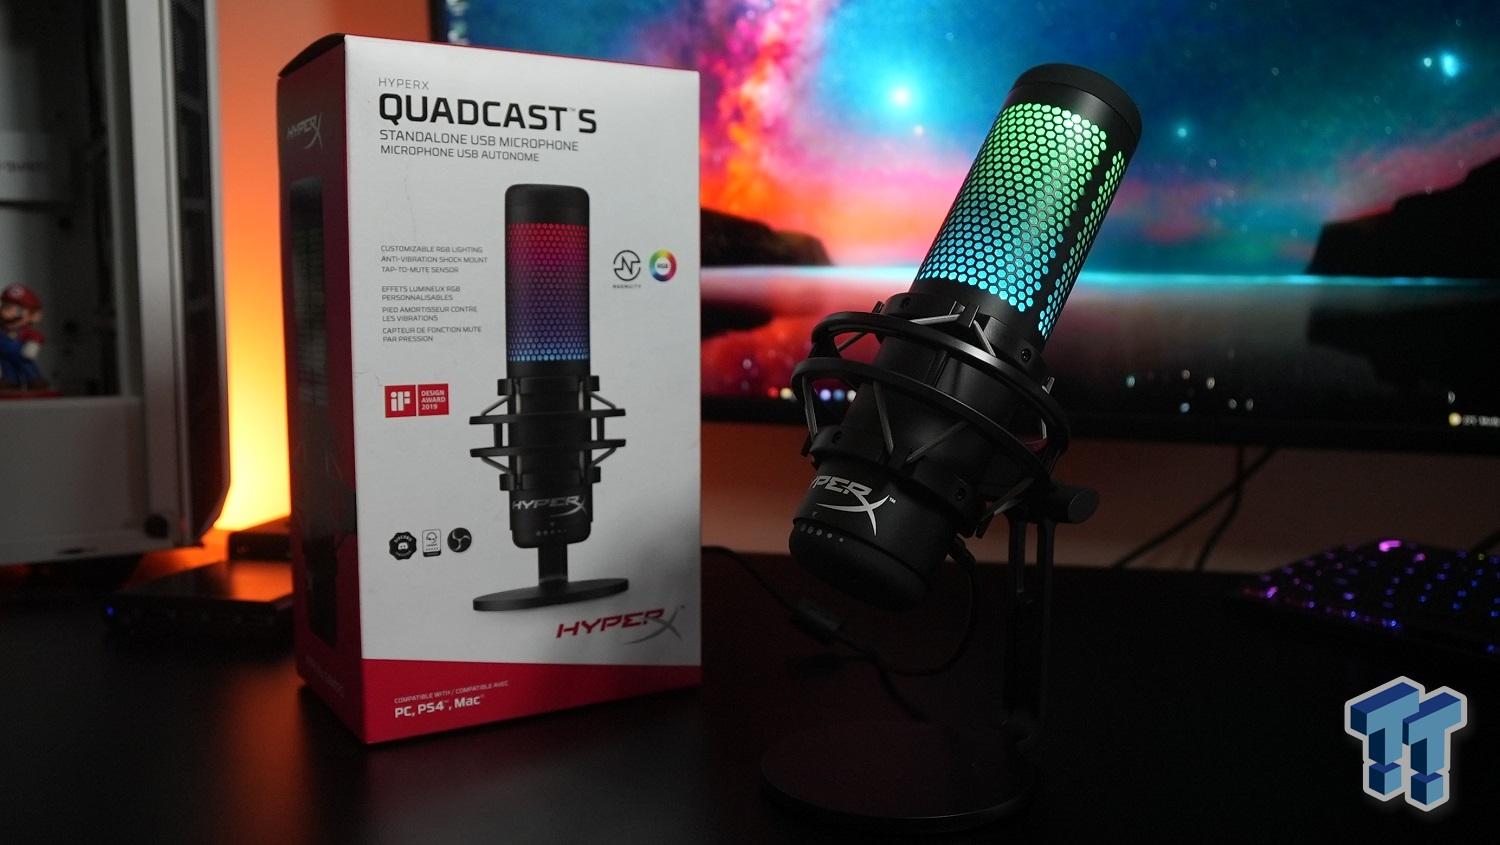 HyperX QuadCast S – RGB USB Condenser Microphone for PC, PS4, PS5 and Mac,  Anti-Vibration Shock Mount, 4 Polar Patterns, Pop Filter, Gain Control